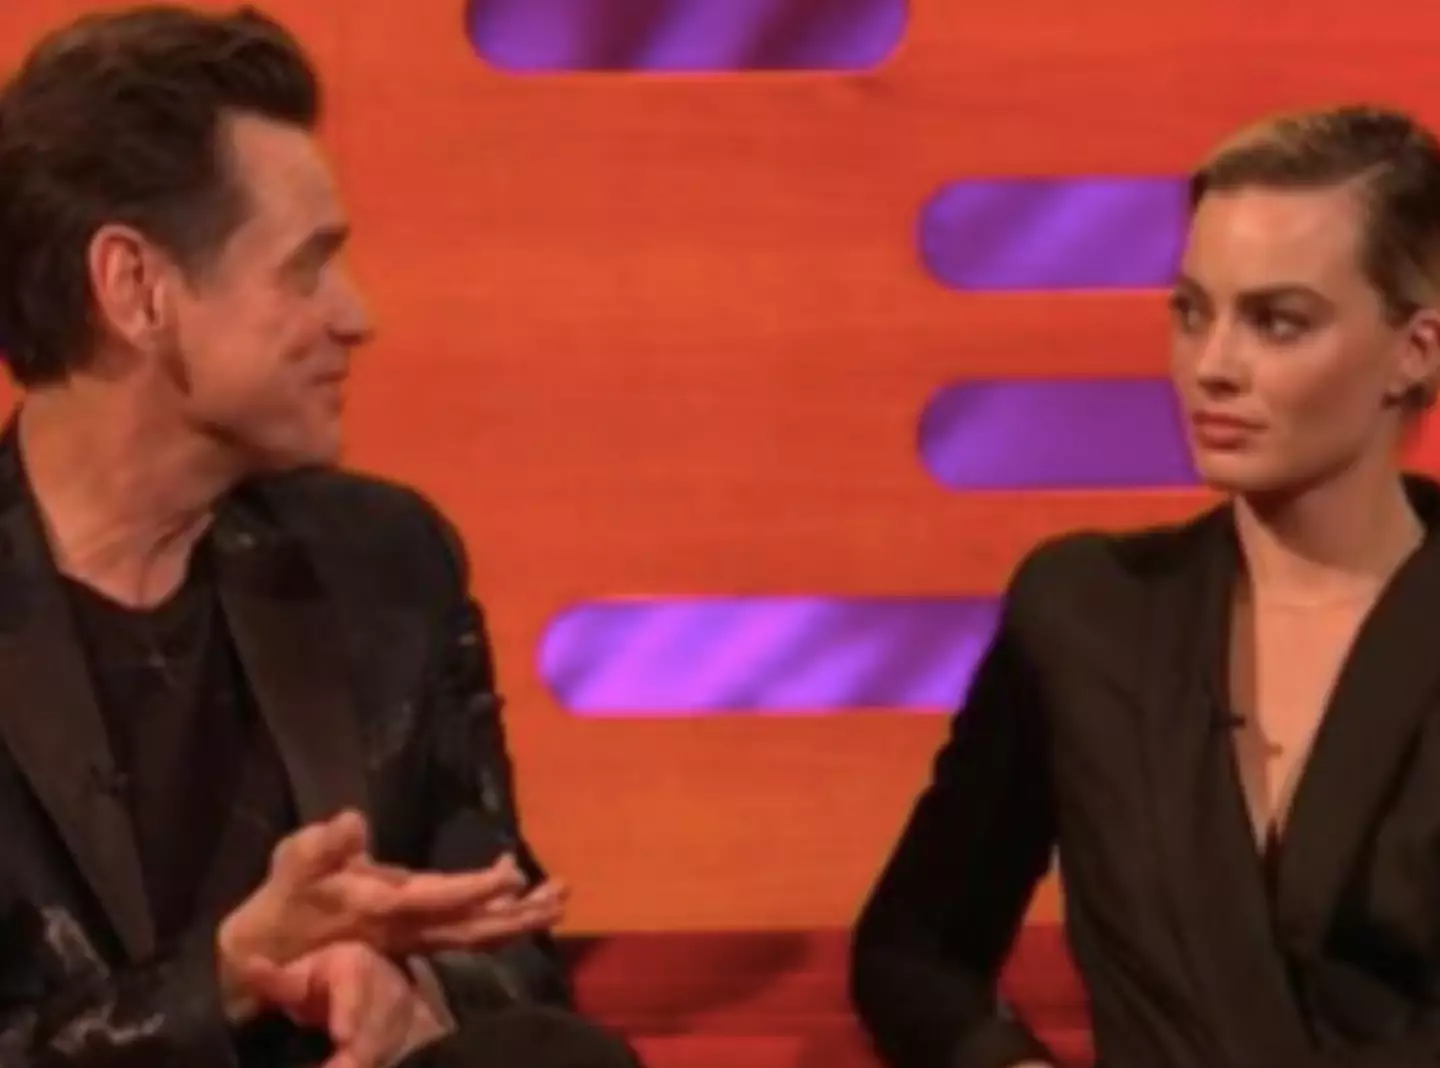 The pair were appearing together on The Graham Norton Show.